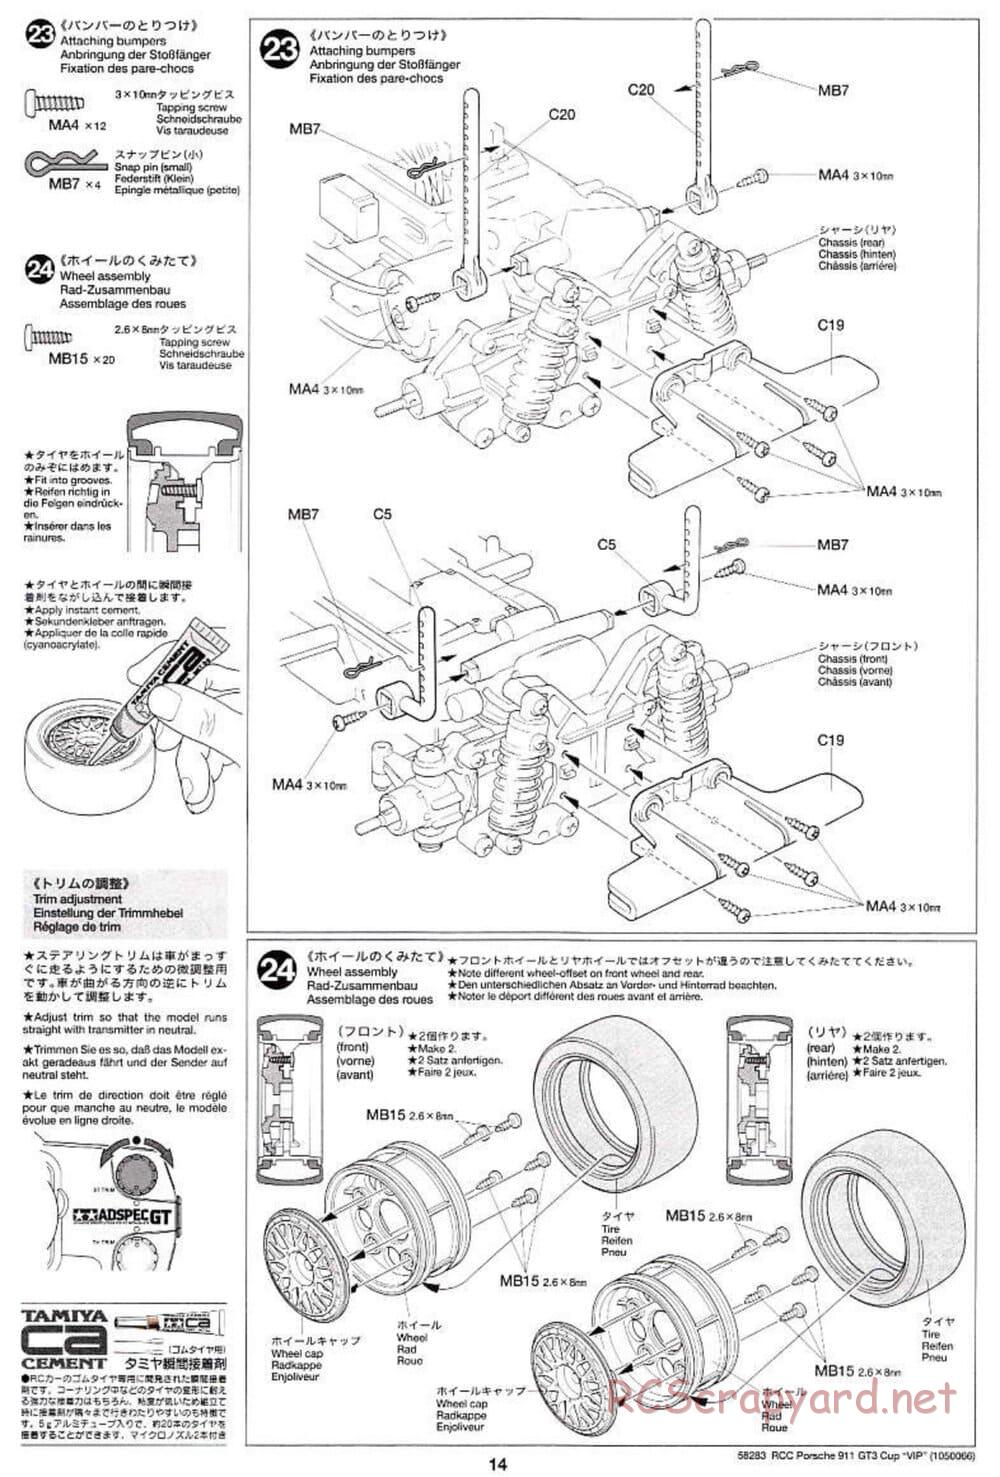 Tamiya - Porsche 911 GT3 Cup VIP - TL-01 Chassis - Manual - Page 14